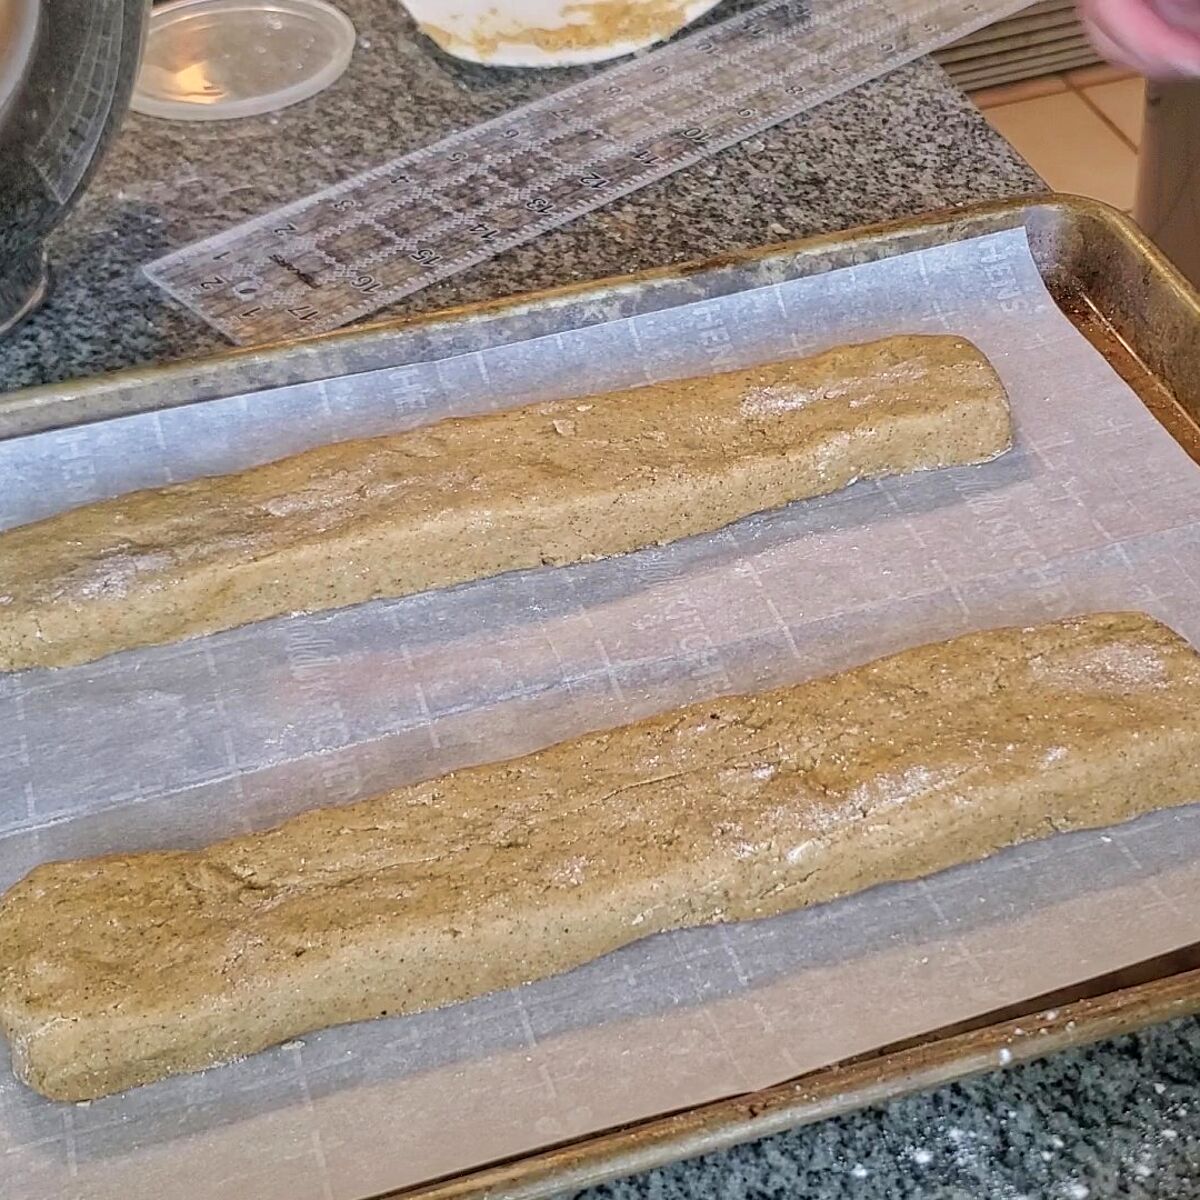 two 2 by 12 inch loaves of gingerbread dough on parchment.